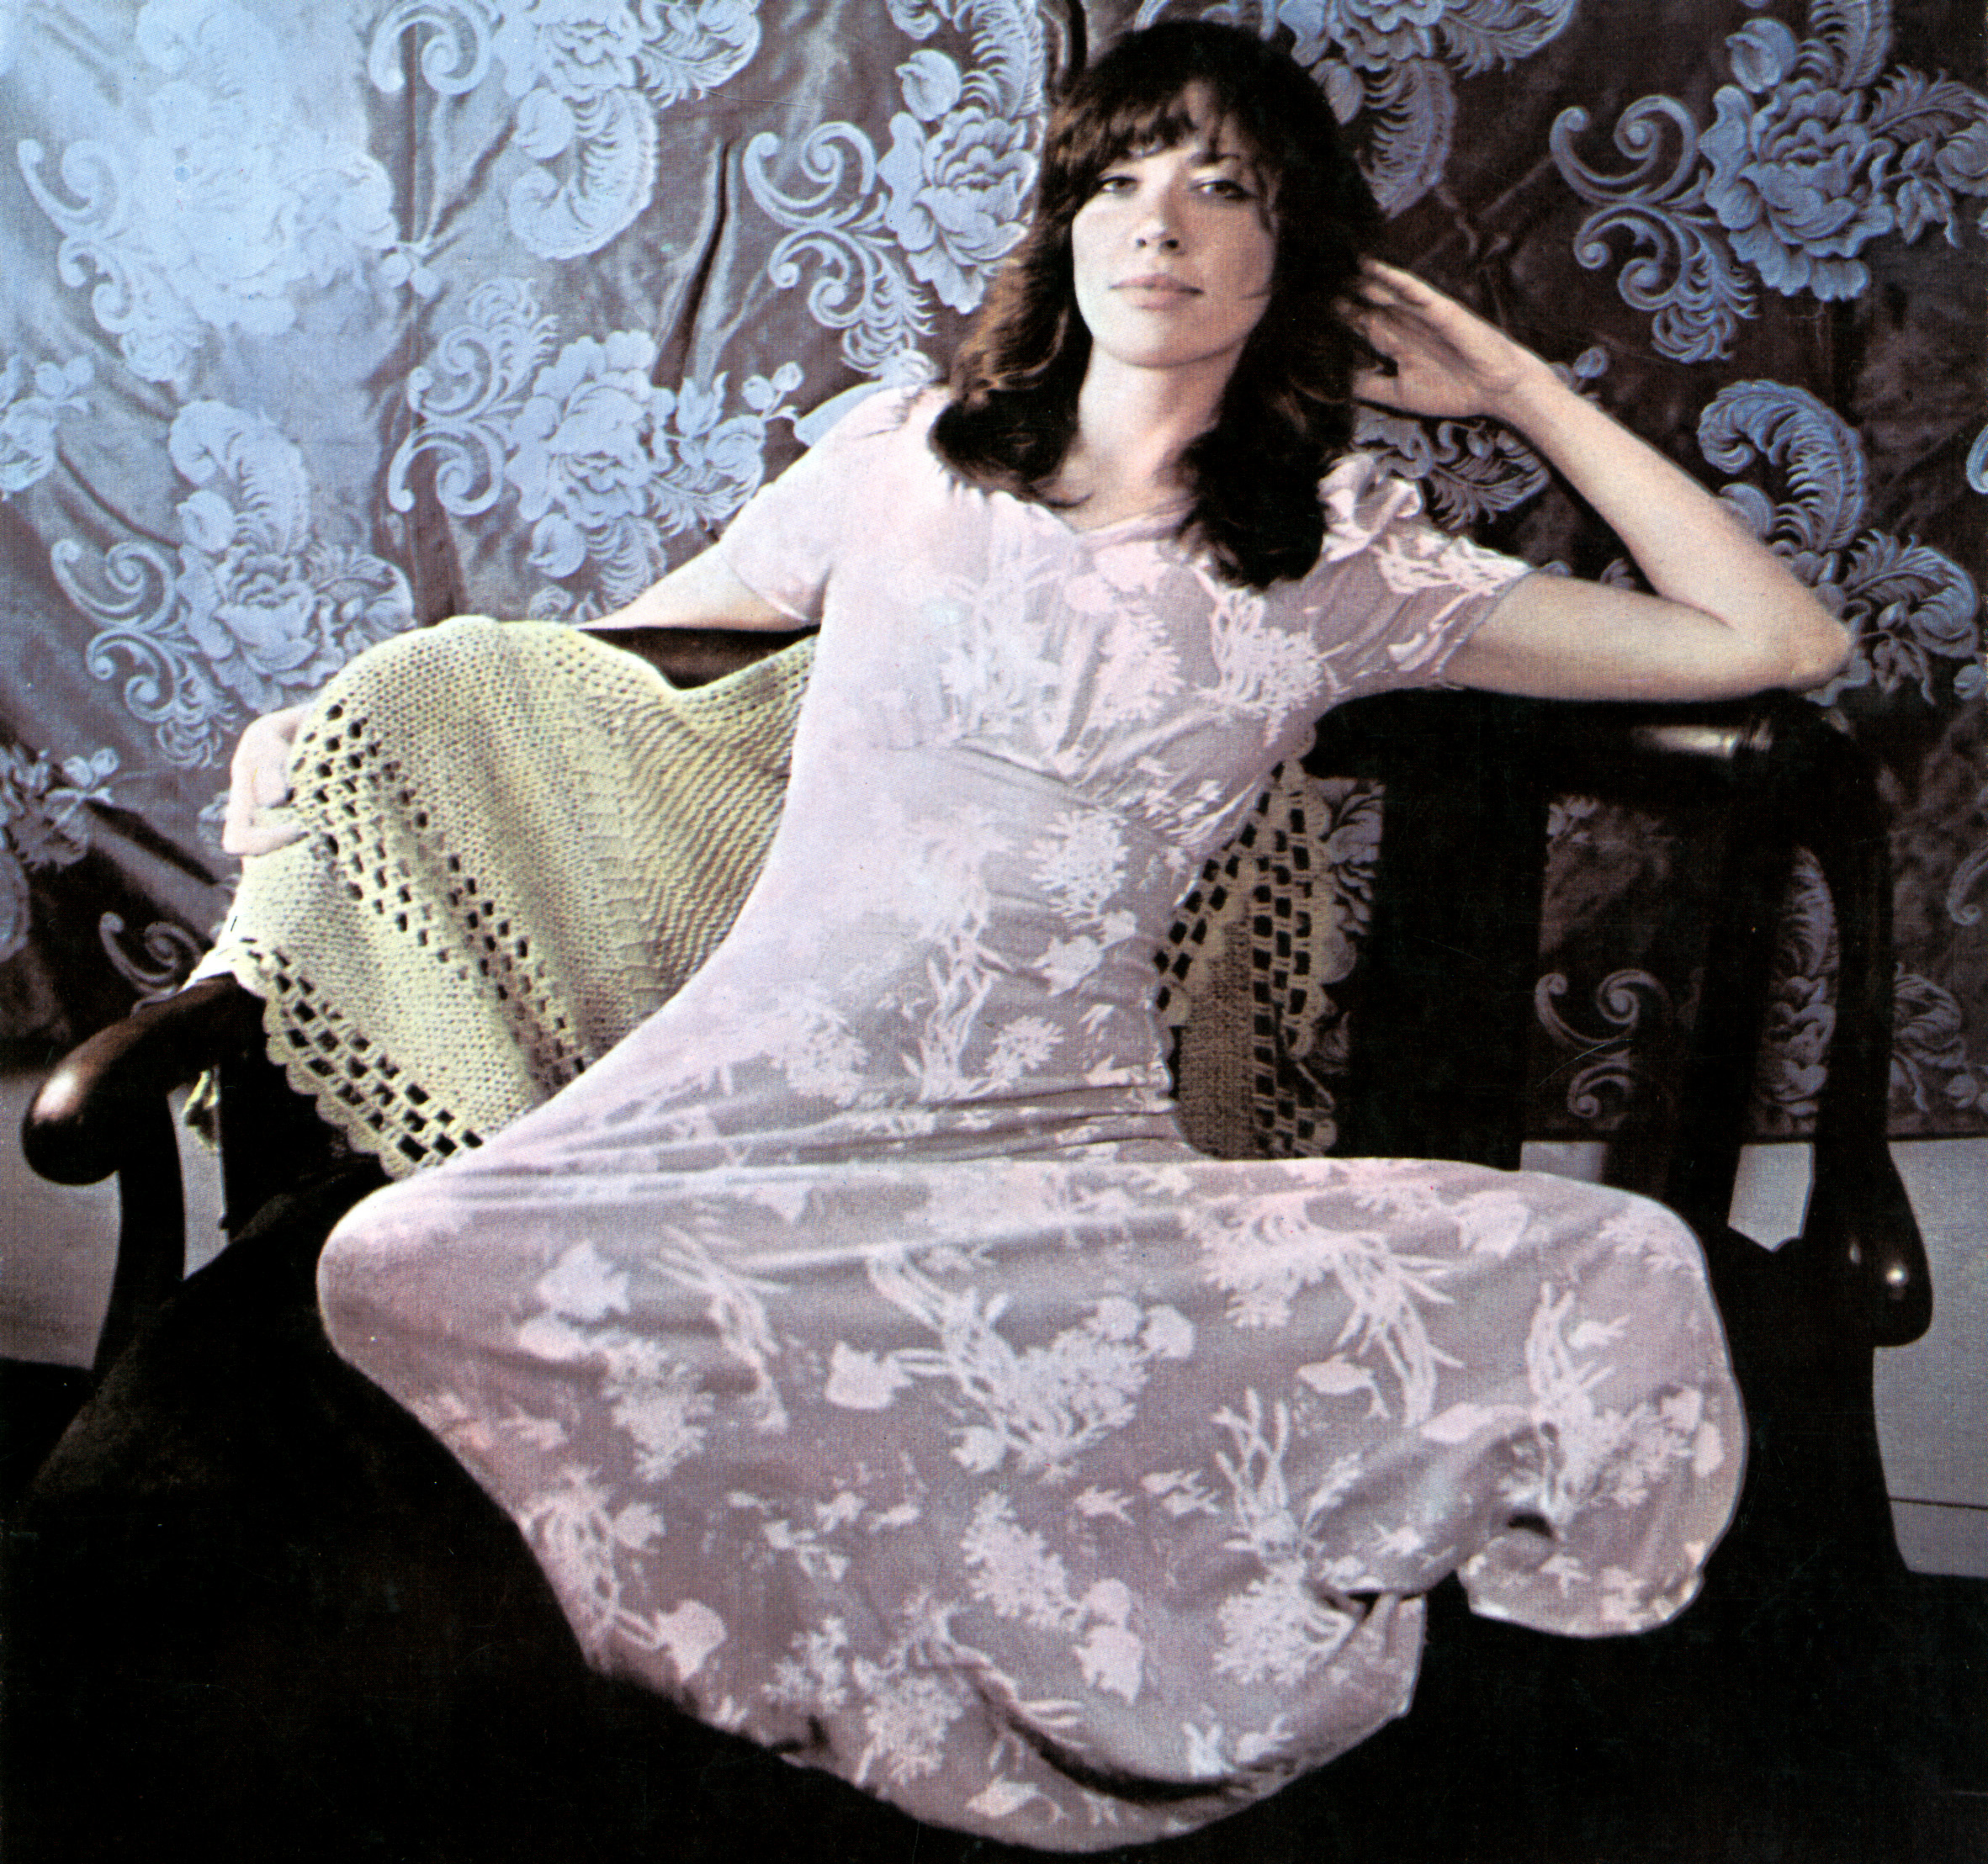 Carly Simon sitting on a chair